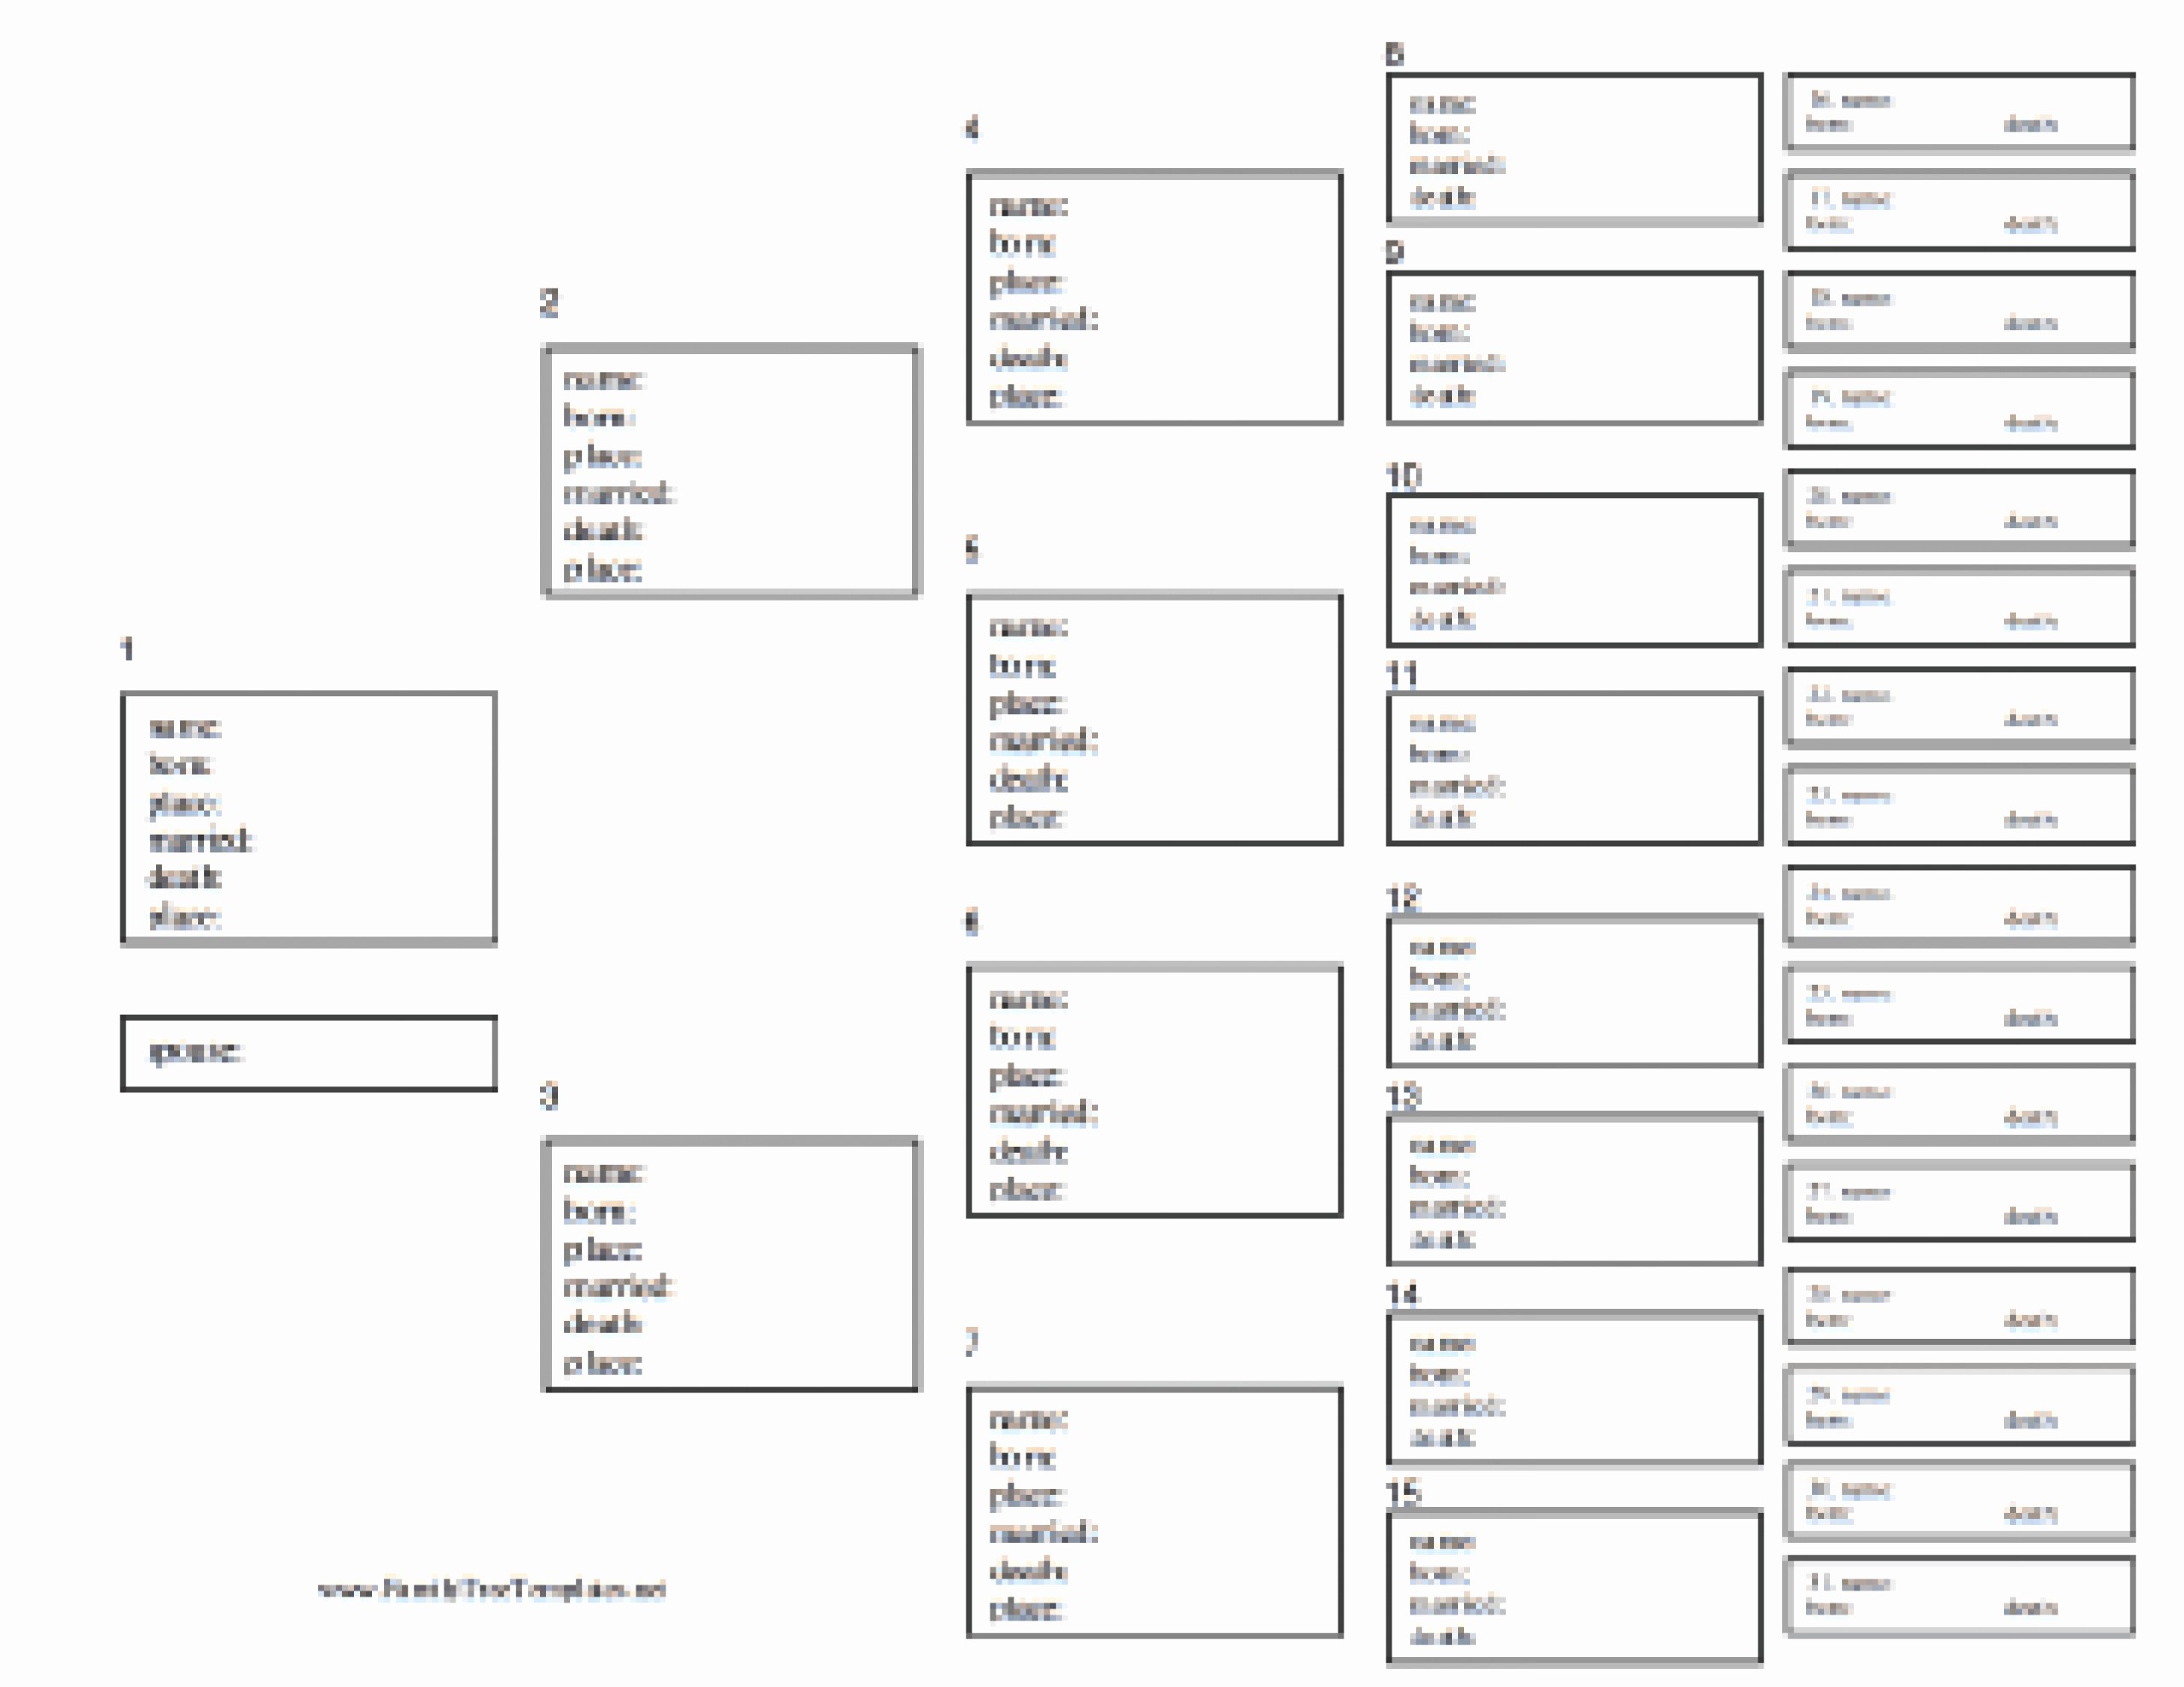 10 Generation Family Tree Excel Inspirational 5 Generation Family Tree Template